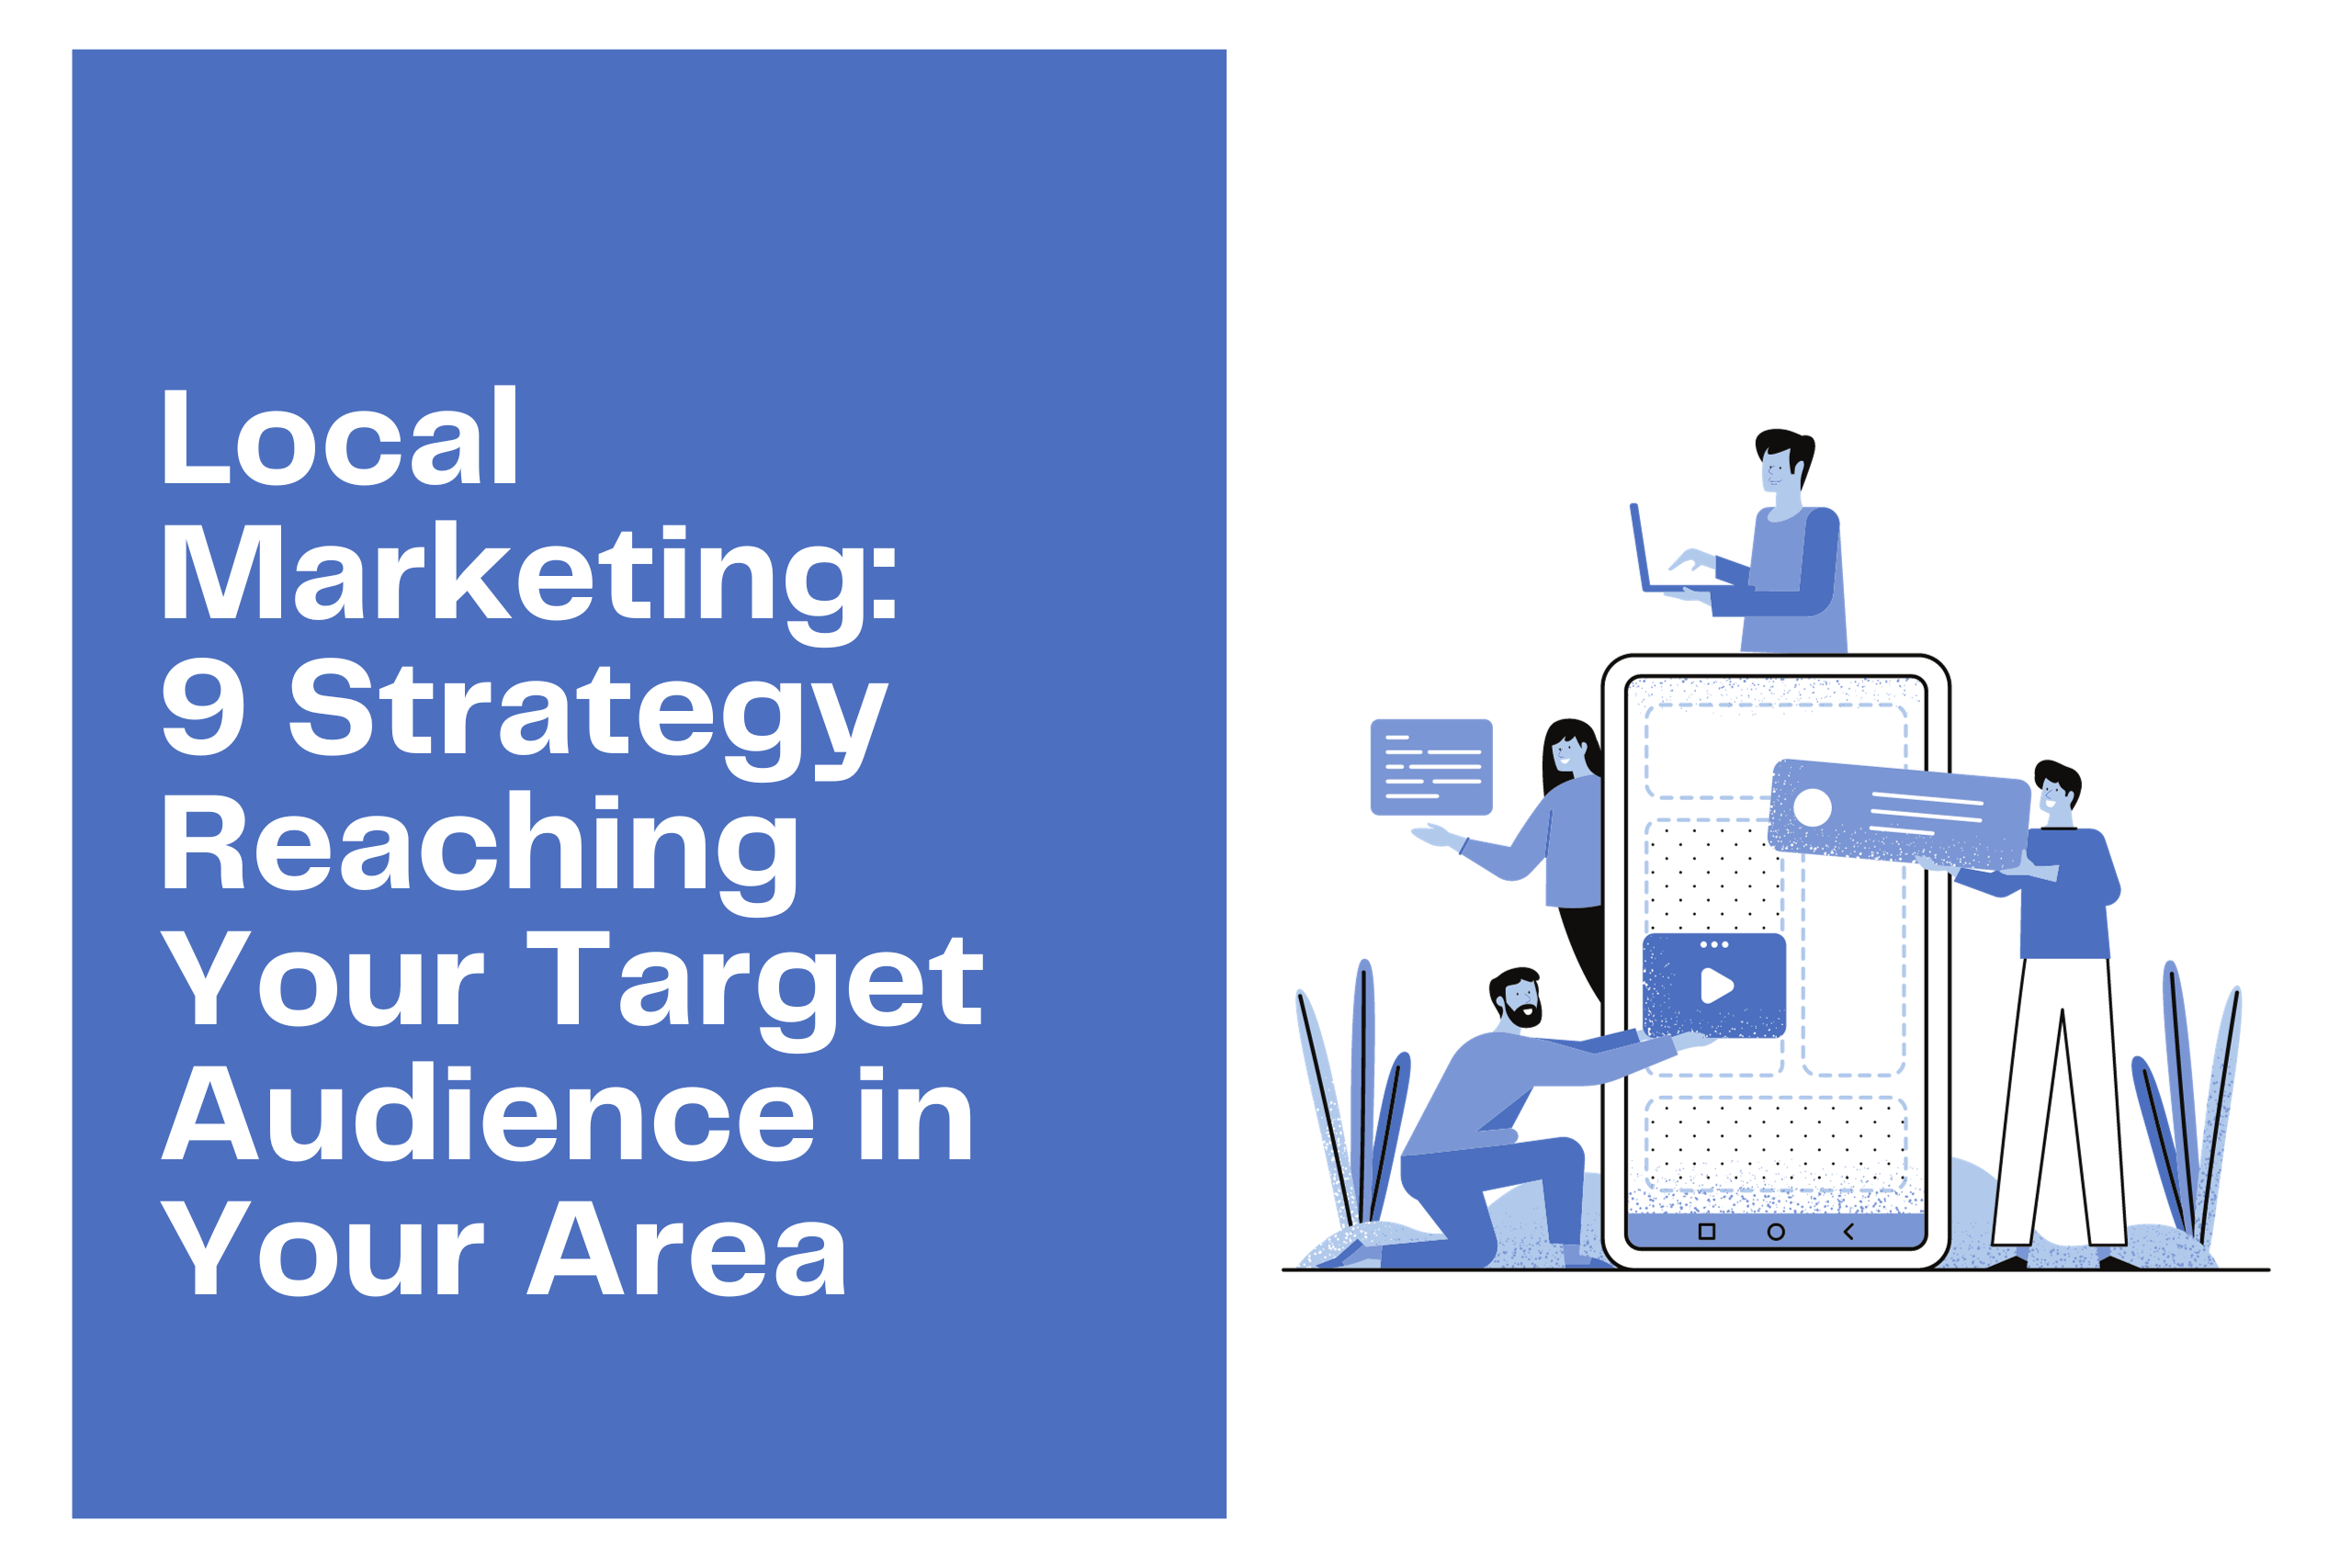 Local Marketing 9 Strategy Reaching Your Target Audience in Your Area